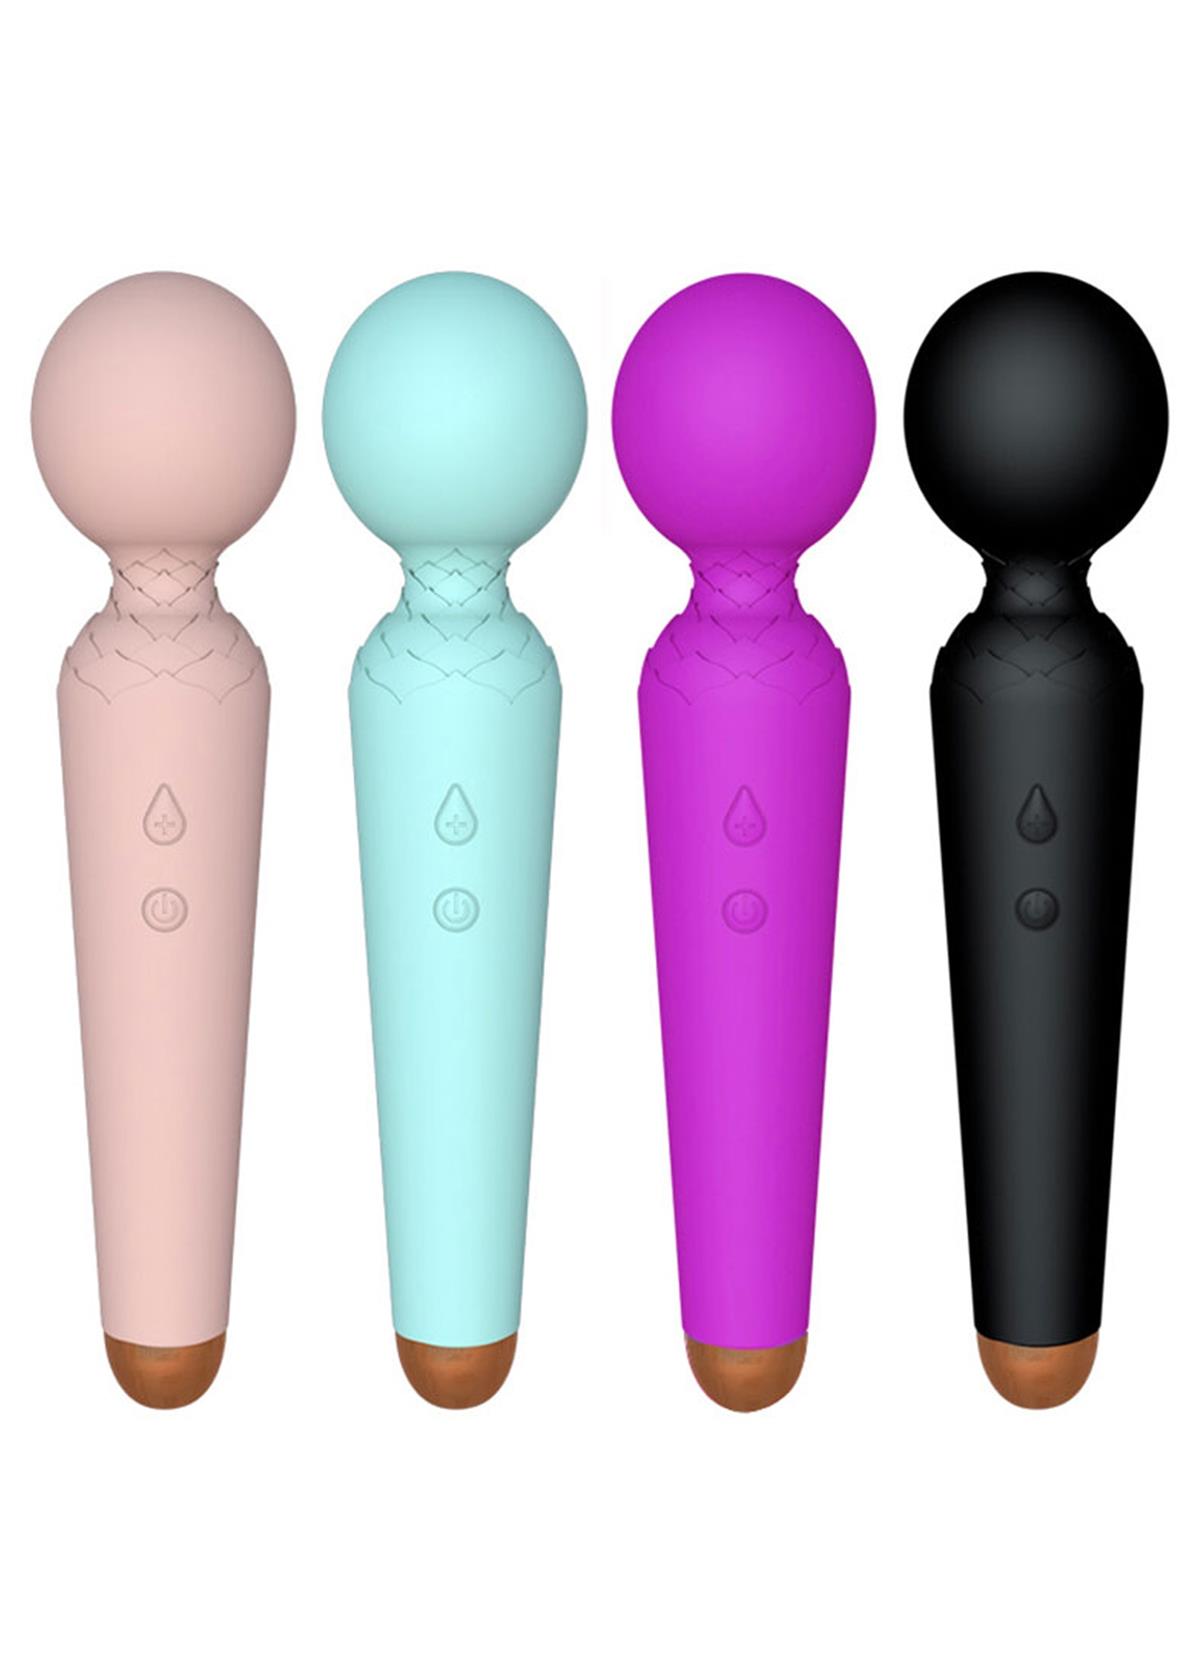 Bossoftoys - 22-00051 - Power wand Massager vibrator - 10 Functions - Silicone - 19,5 cm -  dia 4 cm - Rechargeable - attractive Colour windowbox - Black